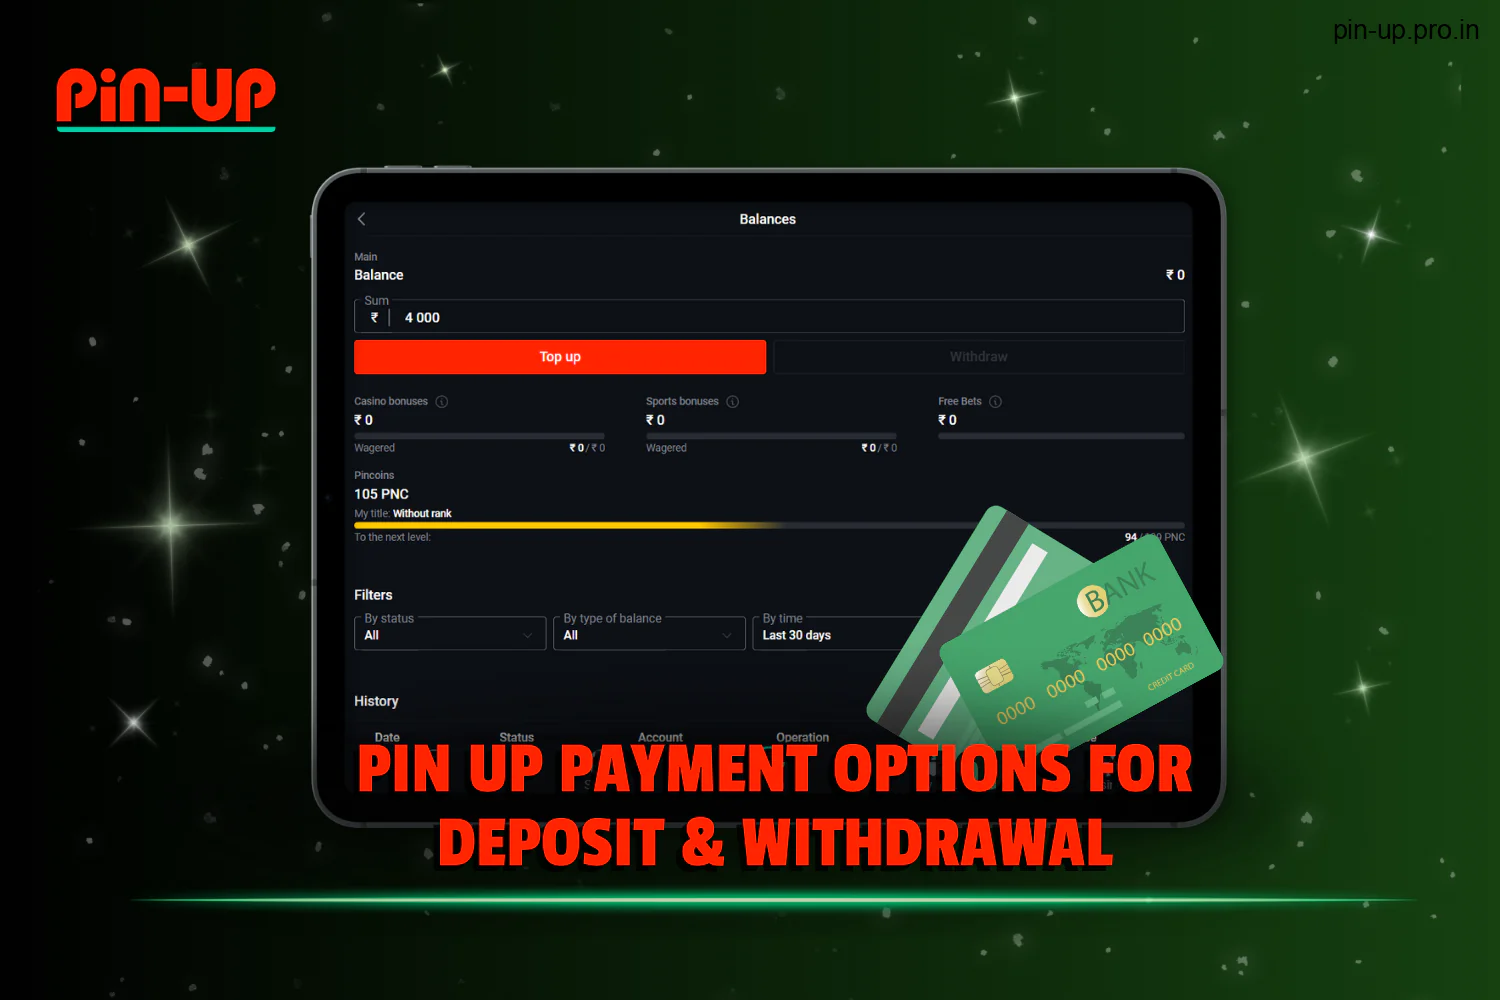 Indian Pin Up users have multiple options for depositing and withdrawing winnings through various payment systems